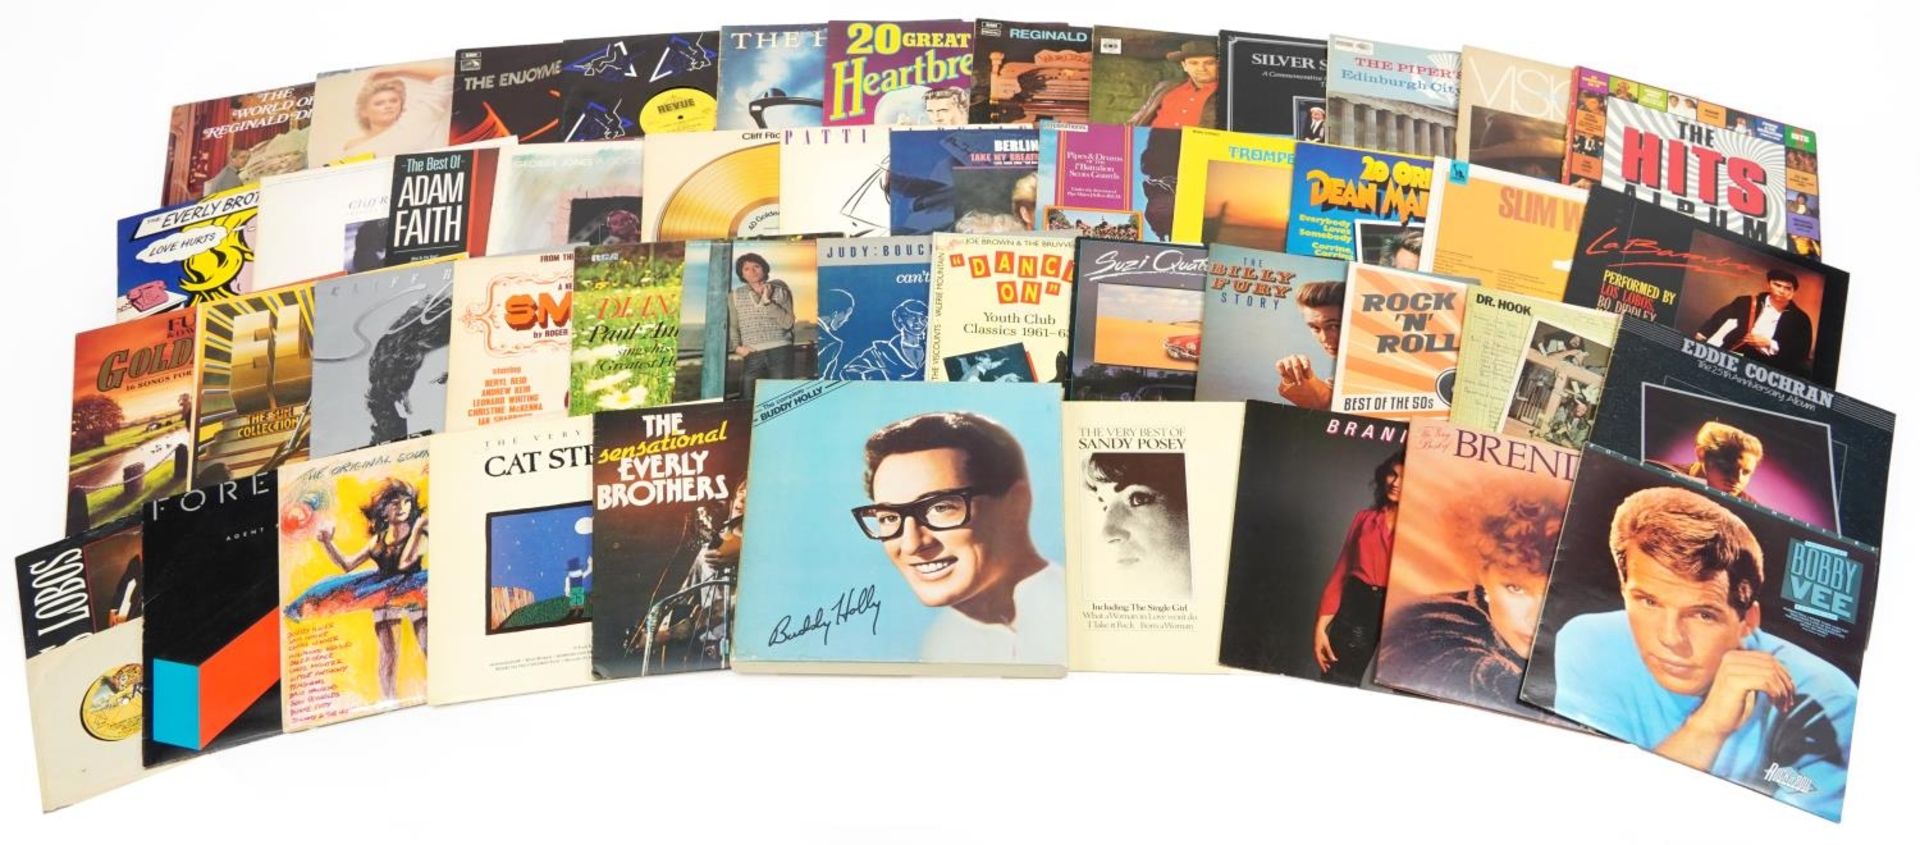 Vinyl LP records including Cliff Richard and Bobby Vee